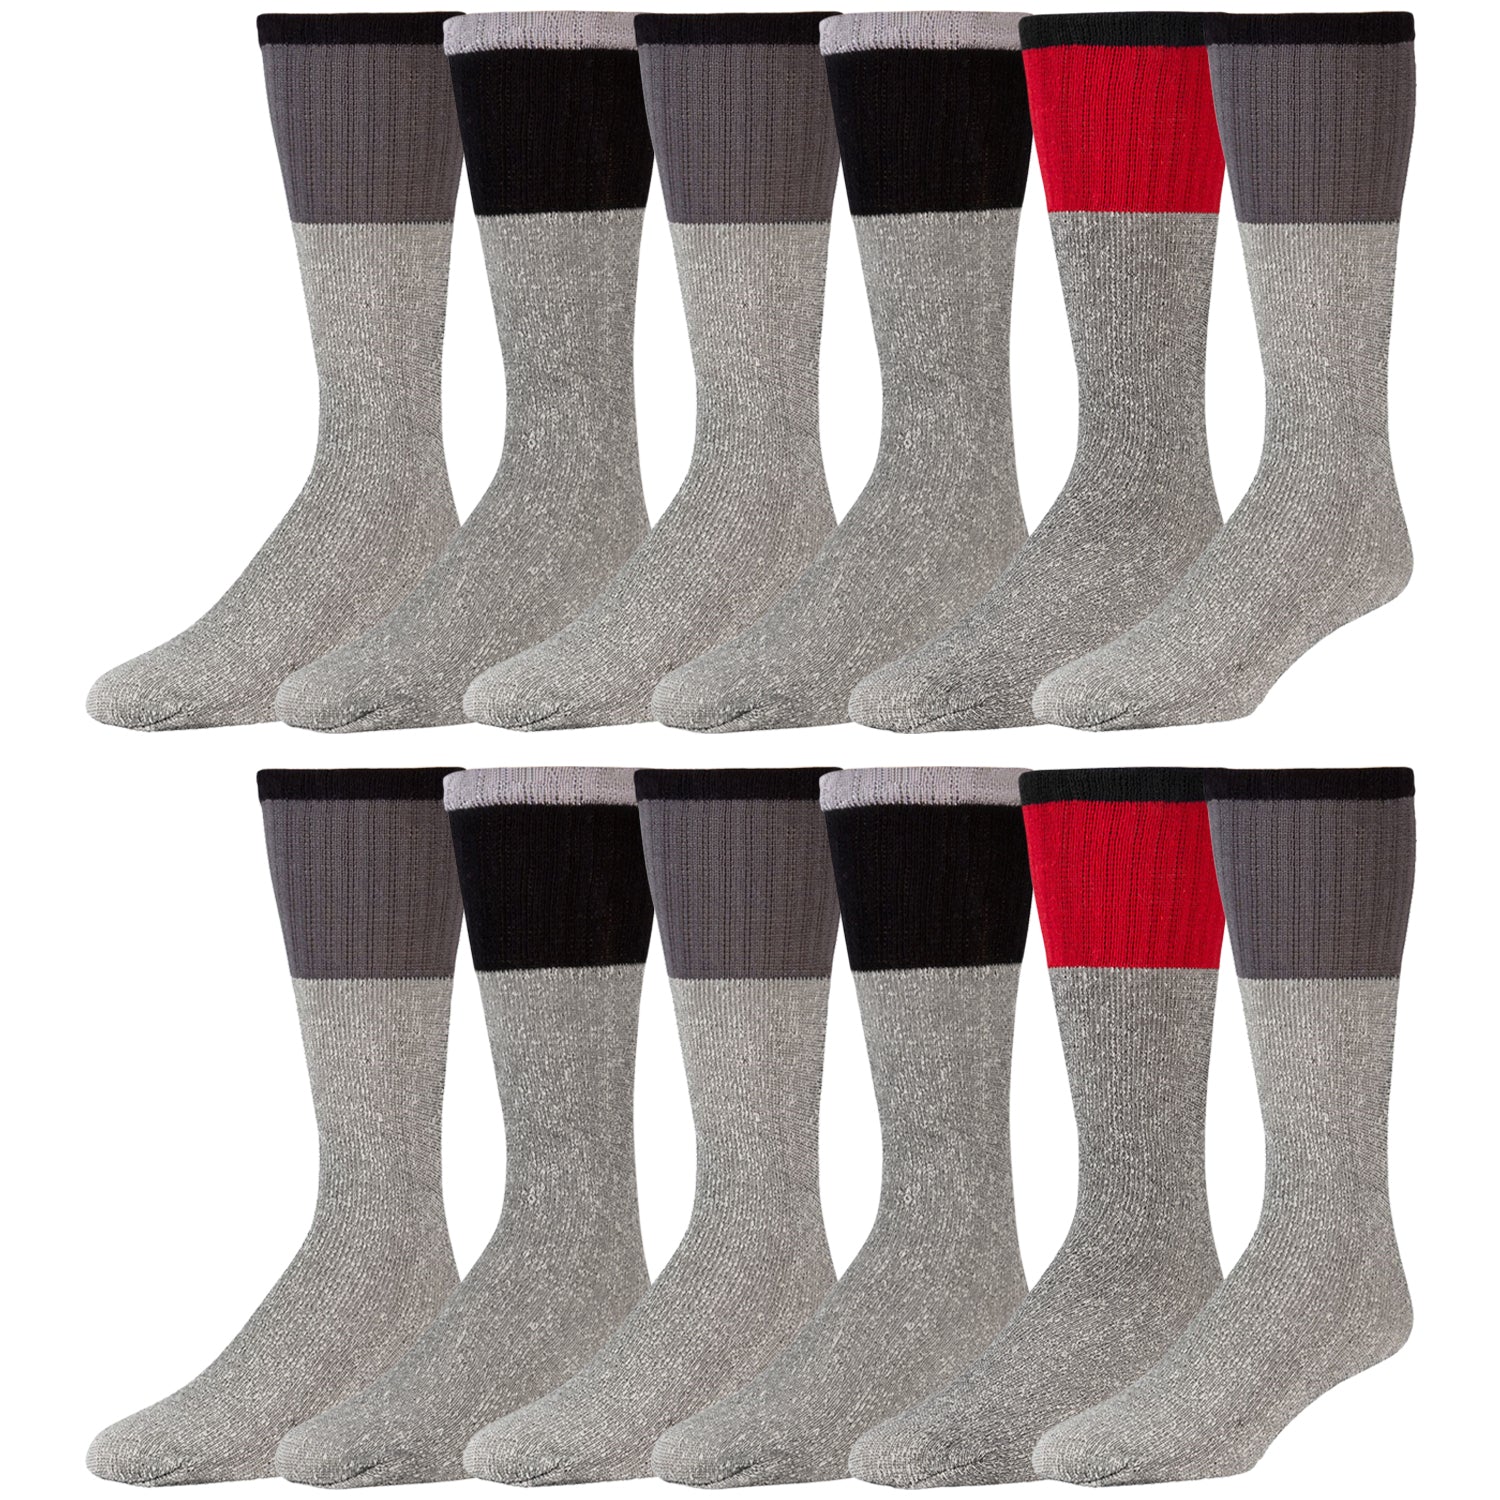 Men's Cotton Blend  Heather Grey Tube Socks For Hiking With Ribbed Colored Tops - 12 Pairs